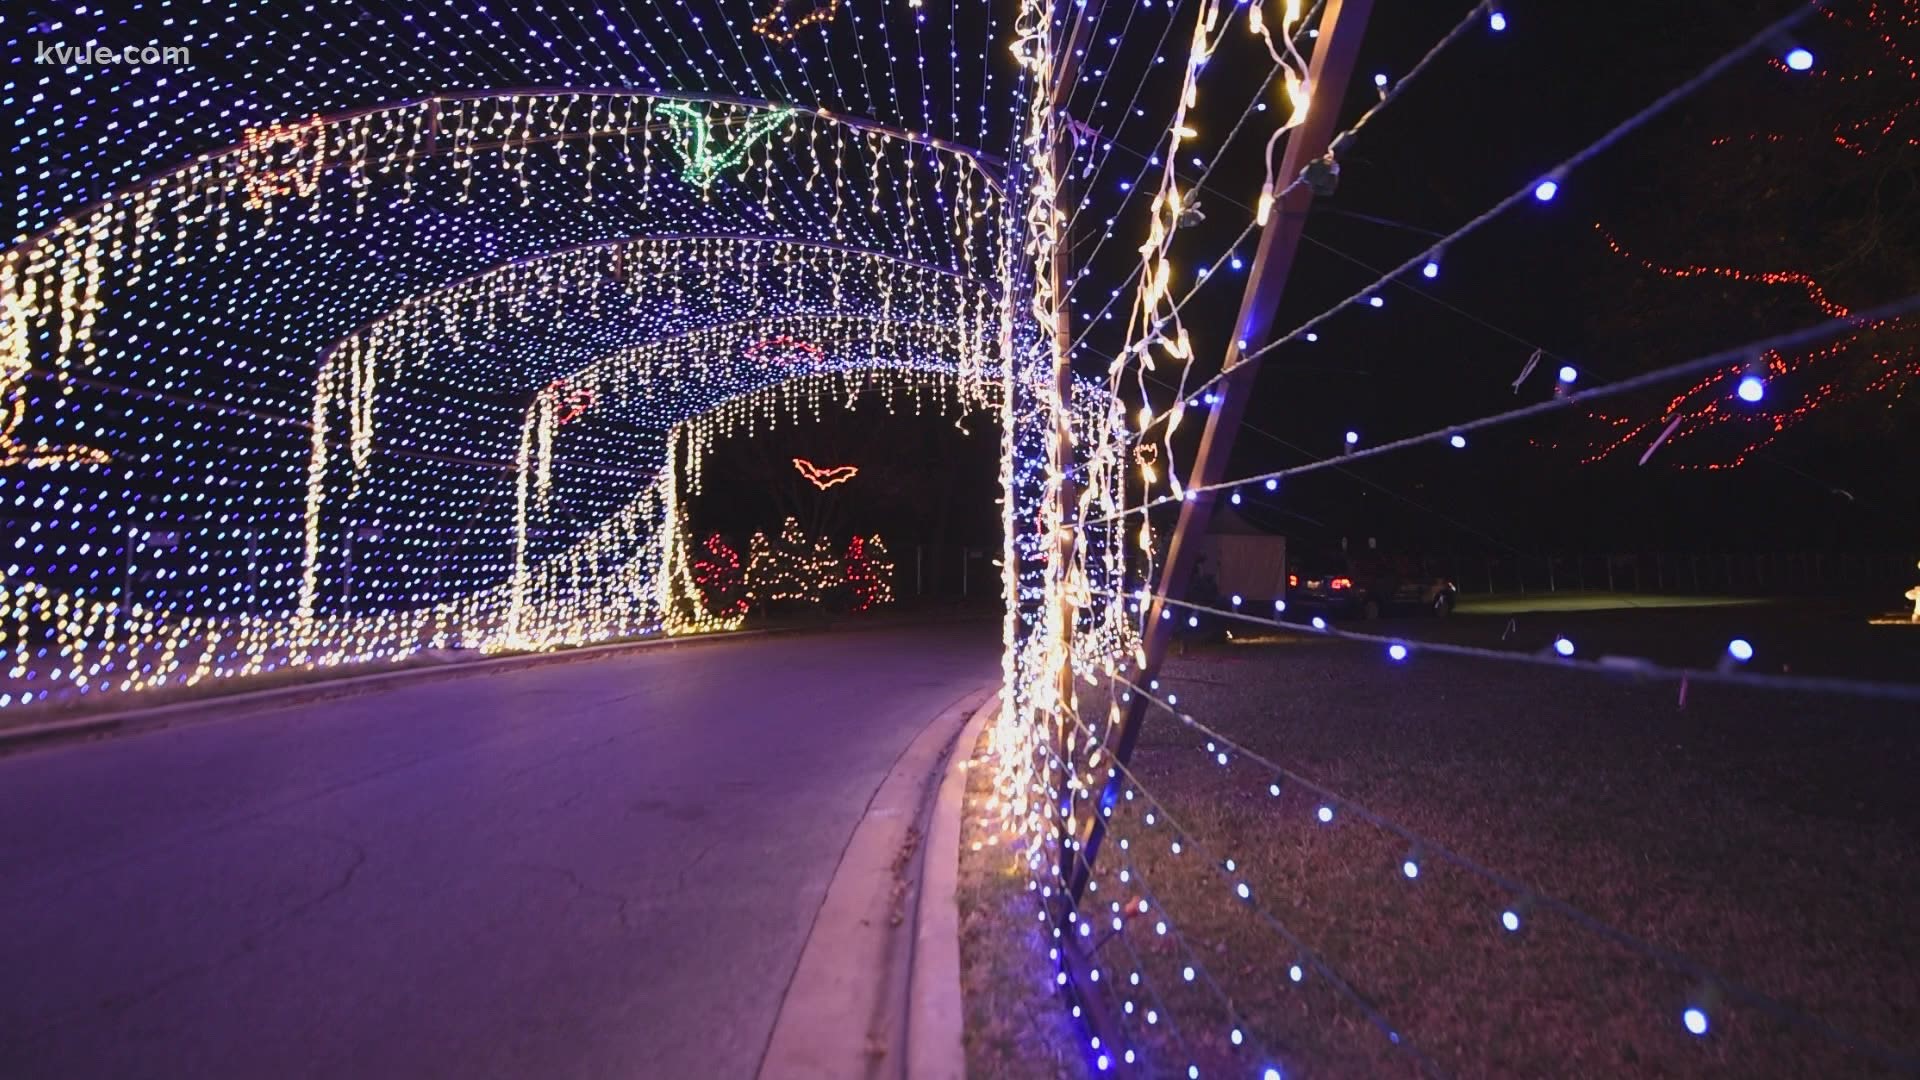 Austin holiday events 2020: Things to do in Central Texas | wtsp.com